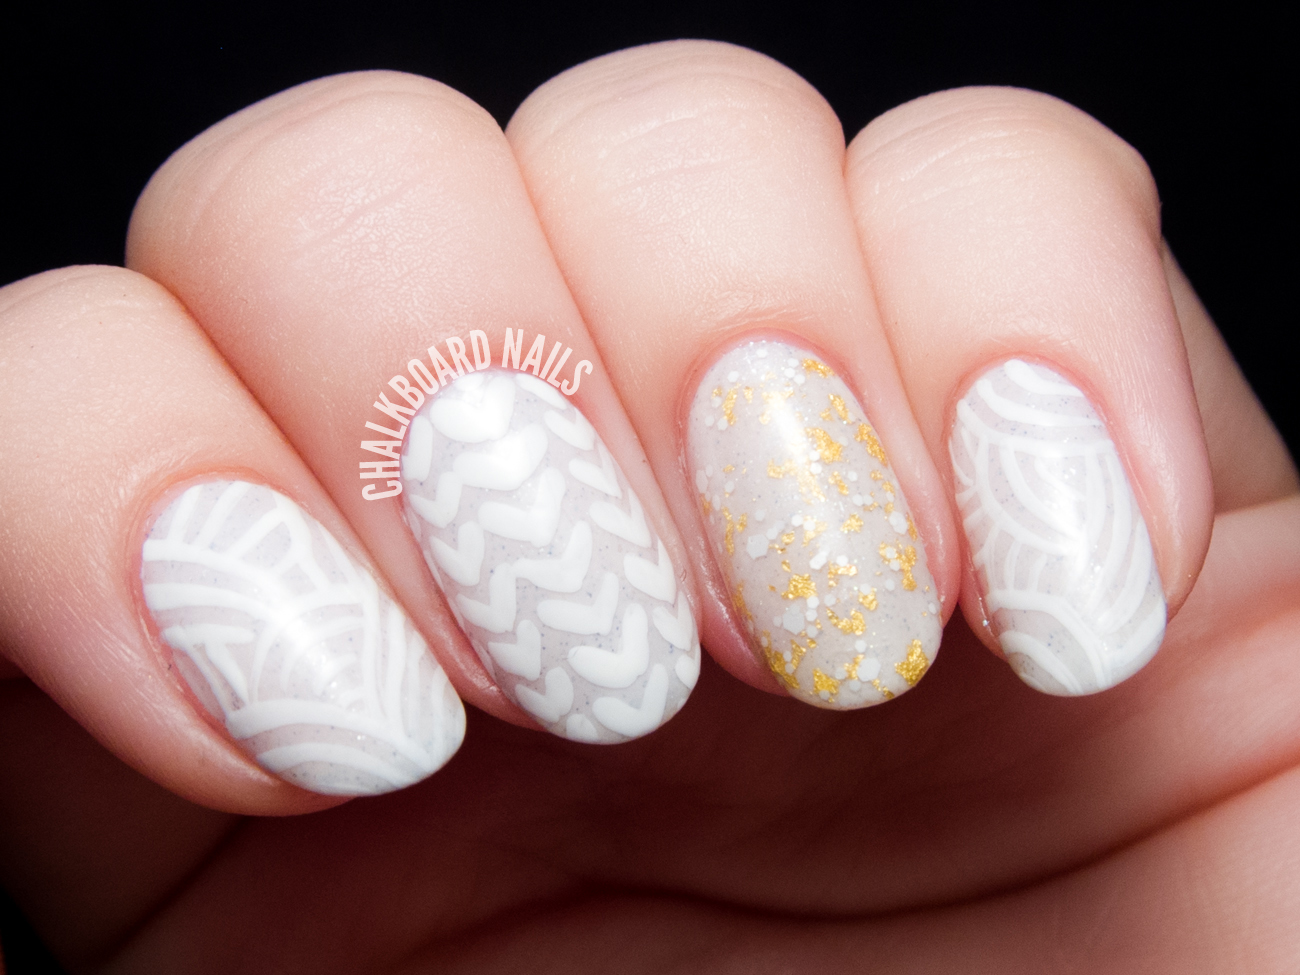 Chunky sweater nails by @chalkboardnails